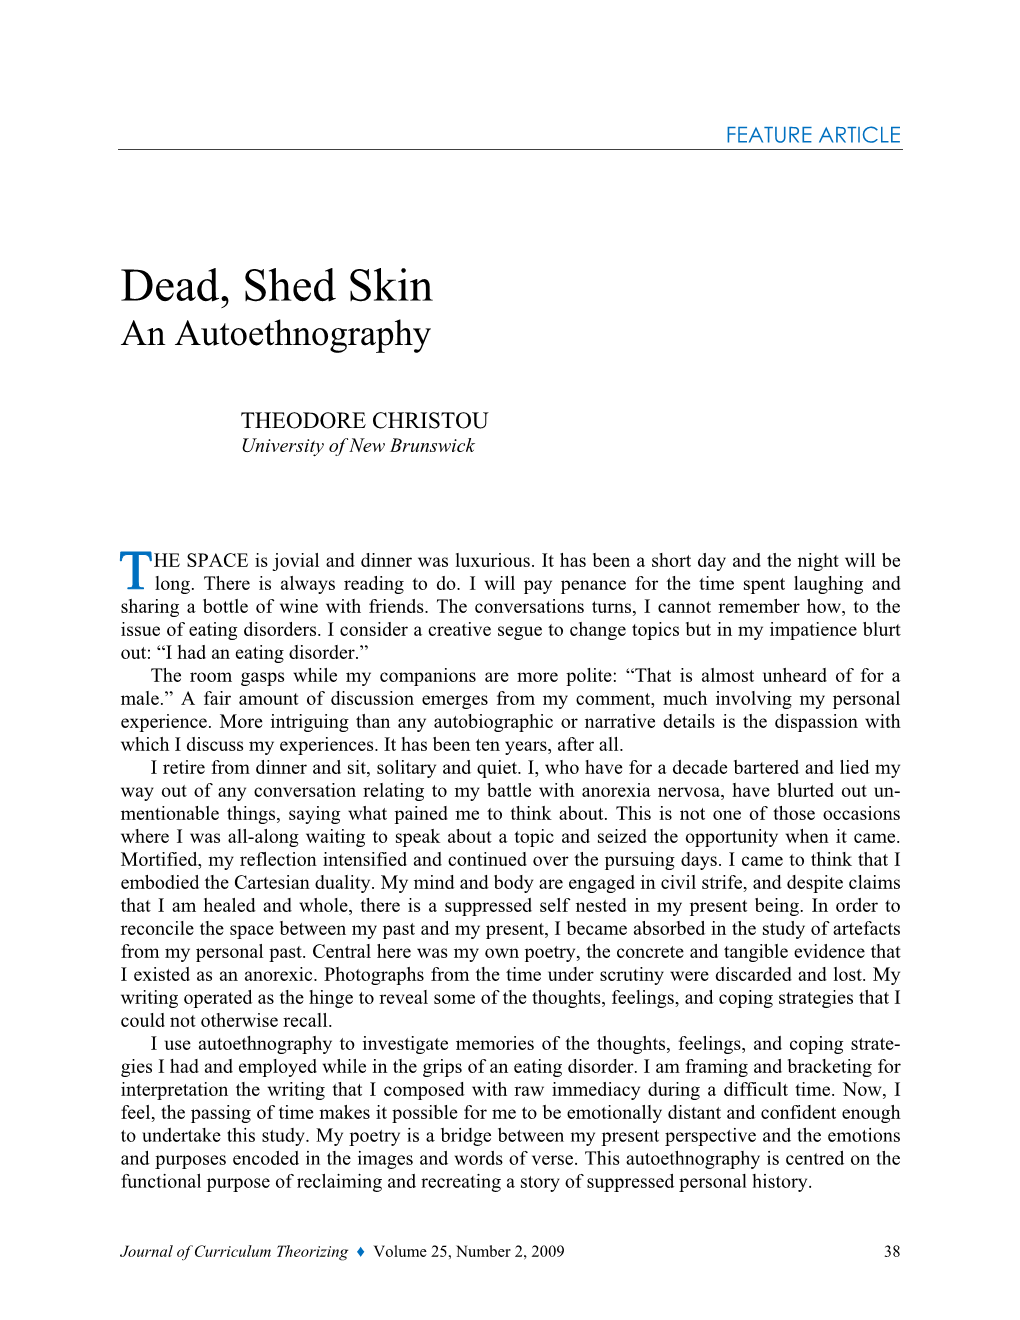 Dead, Shed Skin an Autoethnography